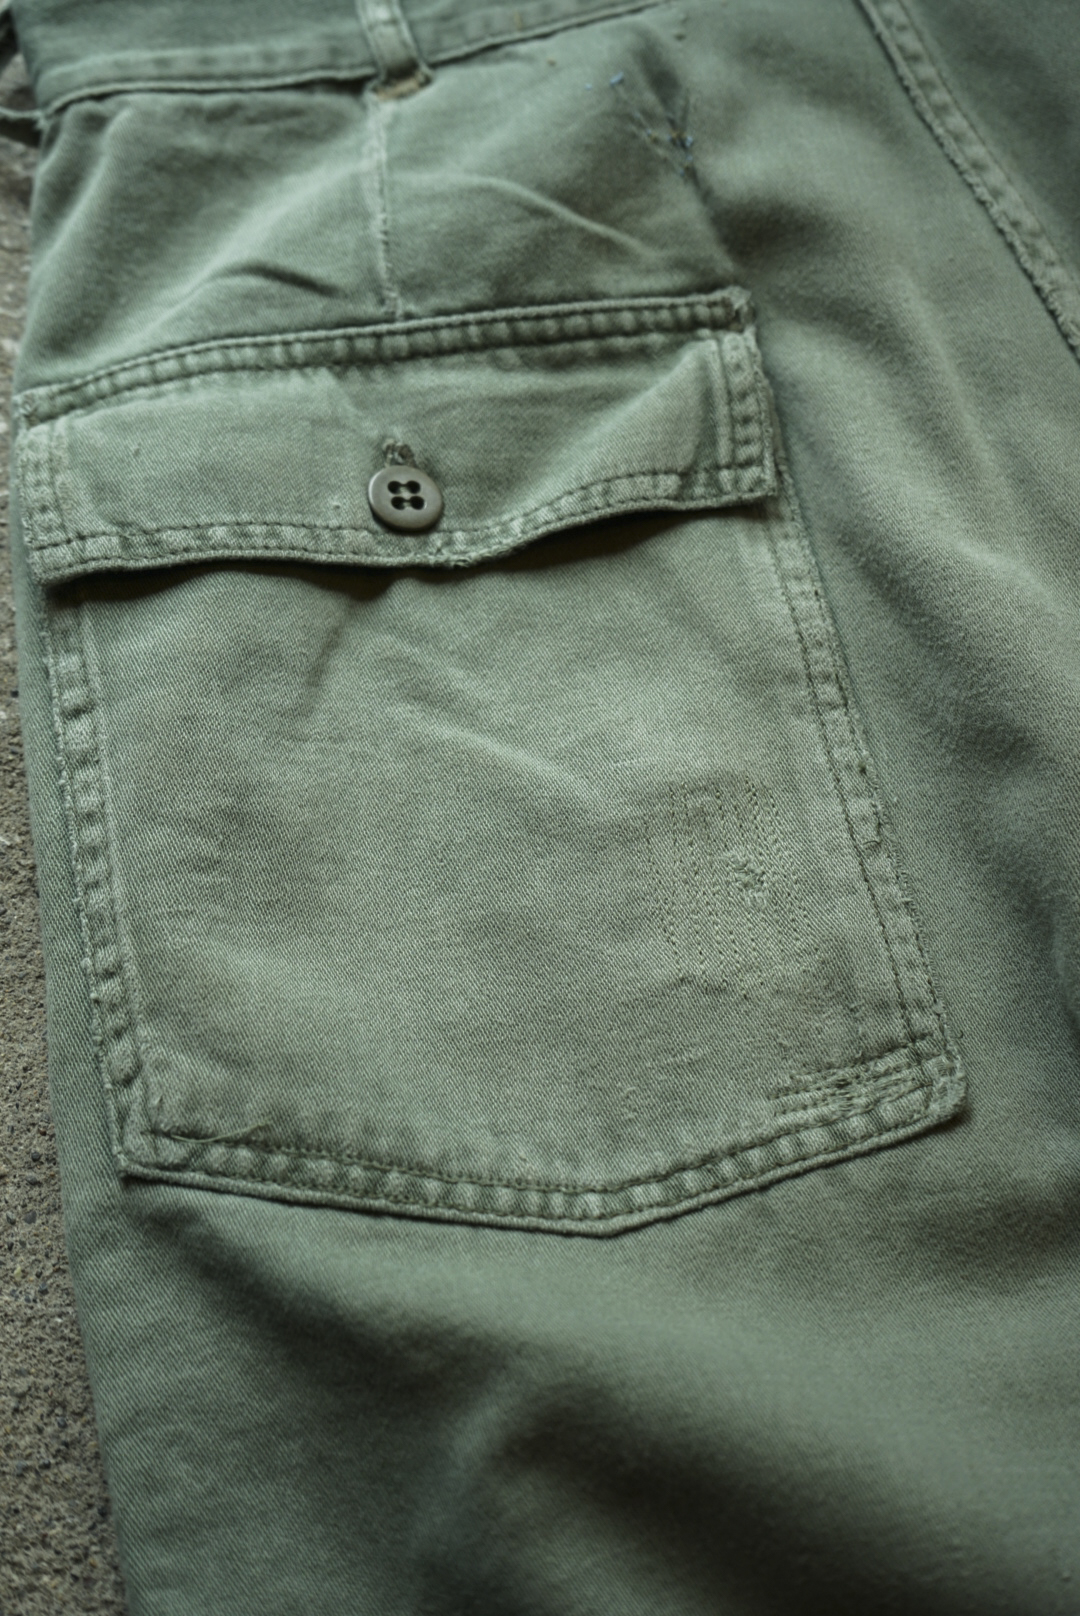 US ARMY BAKER PANTS REPAIRED 03